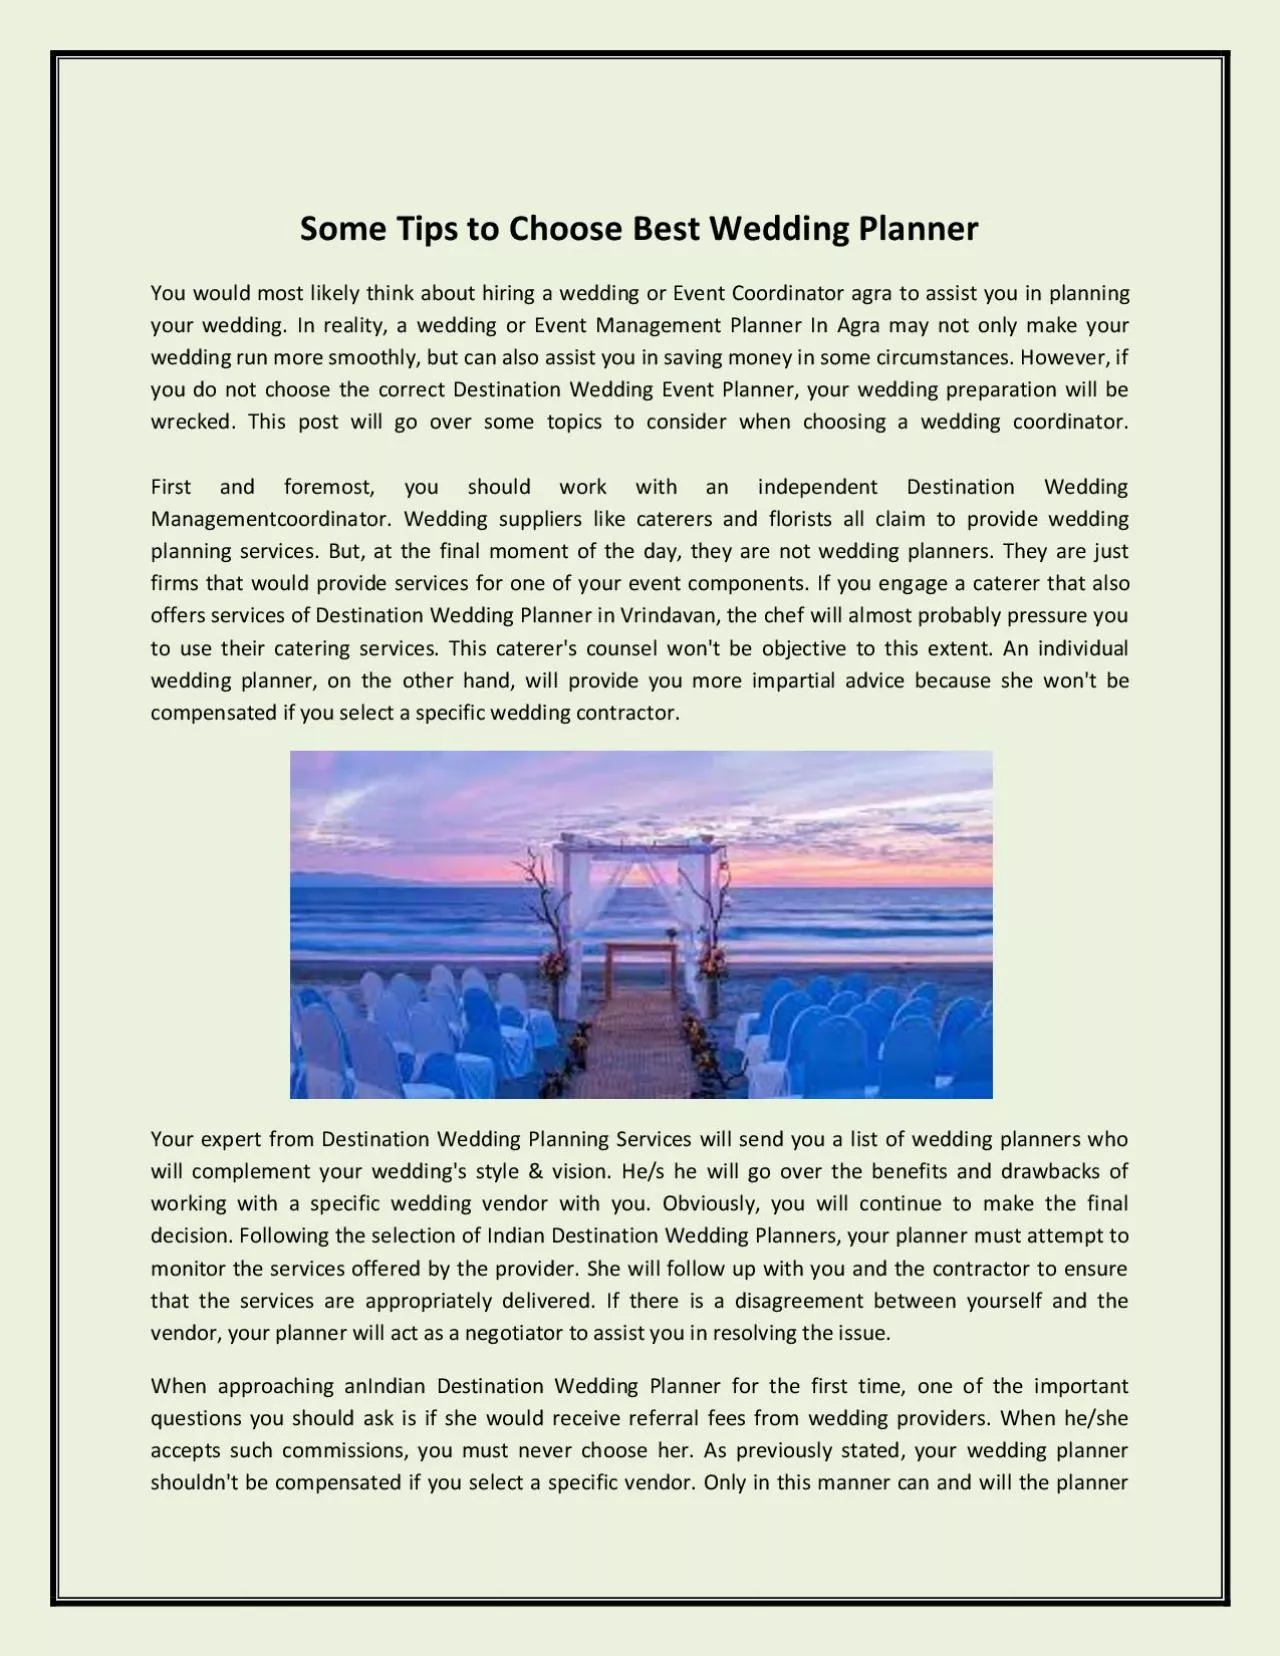 Some Tips to Choose Best Wedding Planner